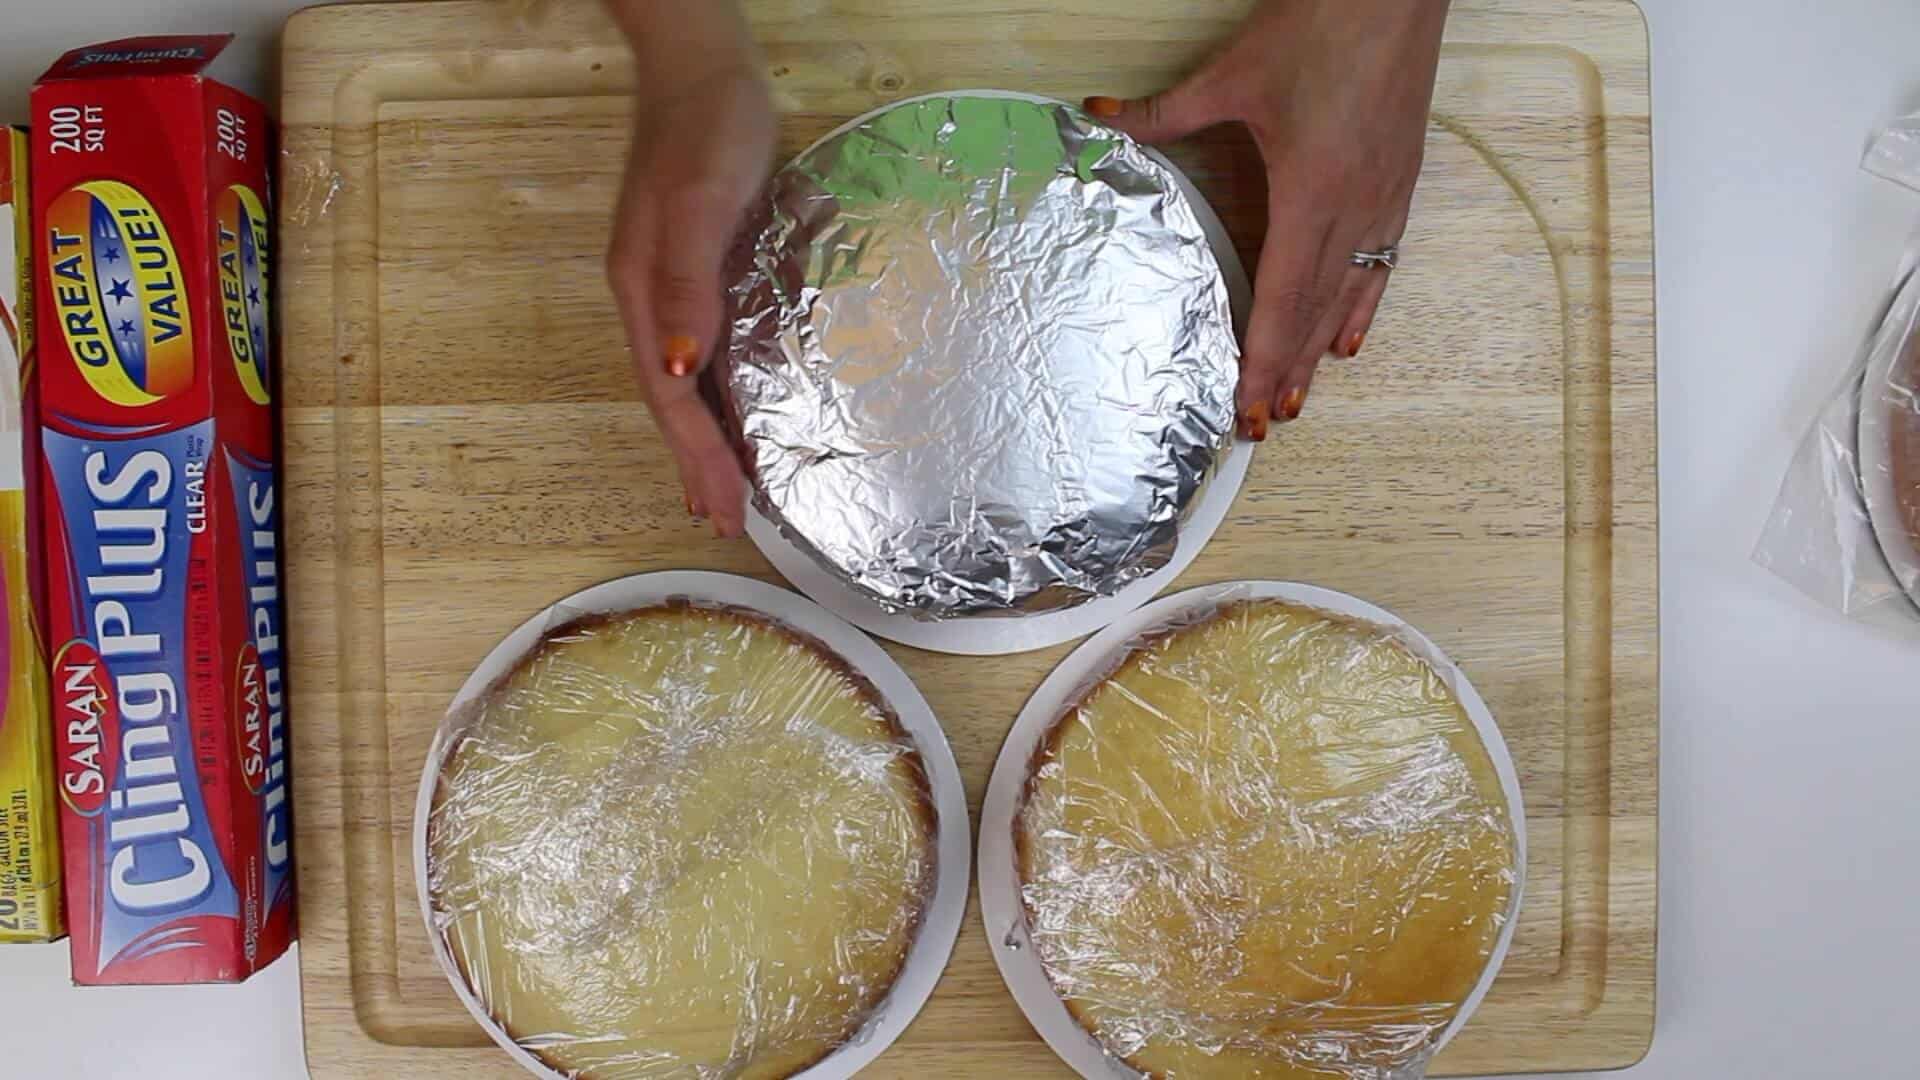 Freezing Cake Layers: Make Life Easier by Making Your Cake in Advance